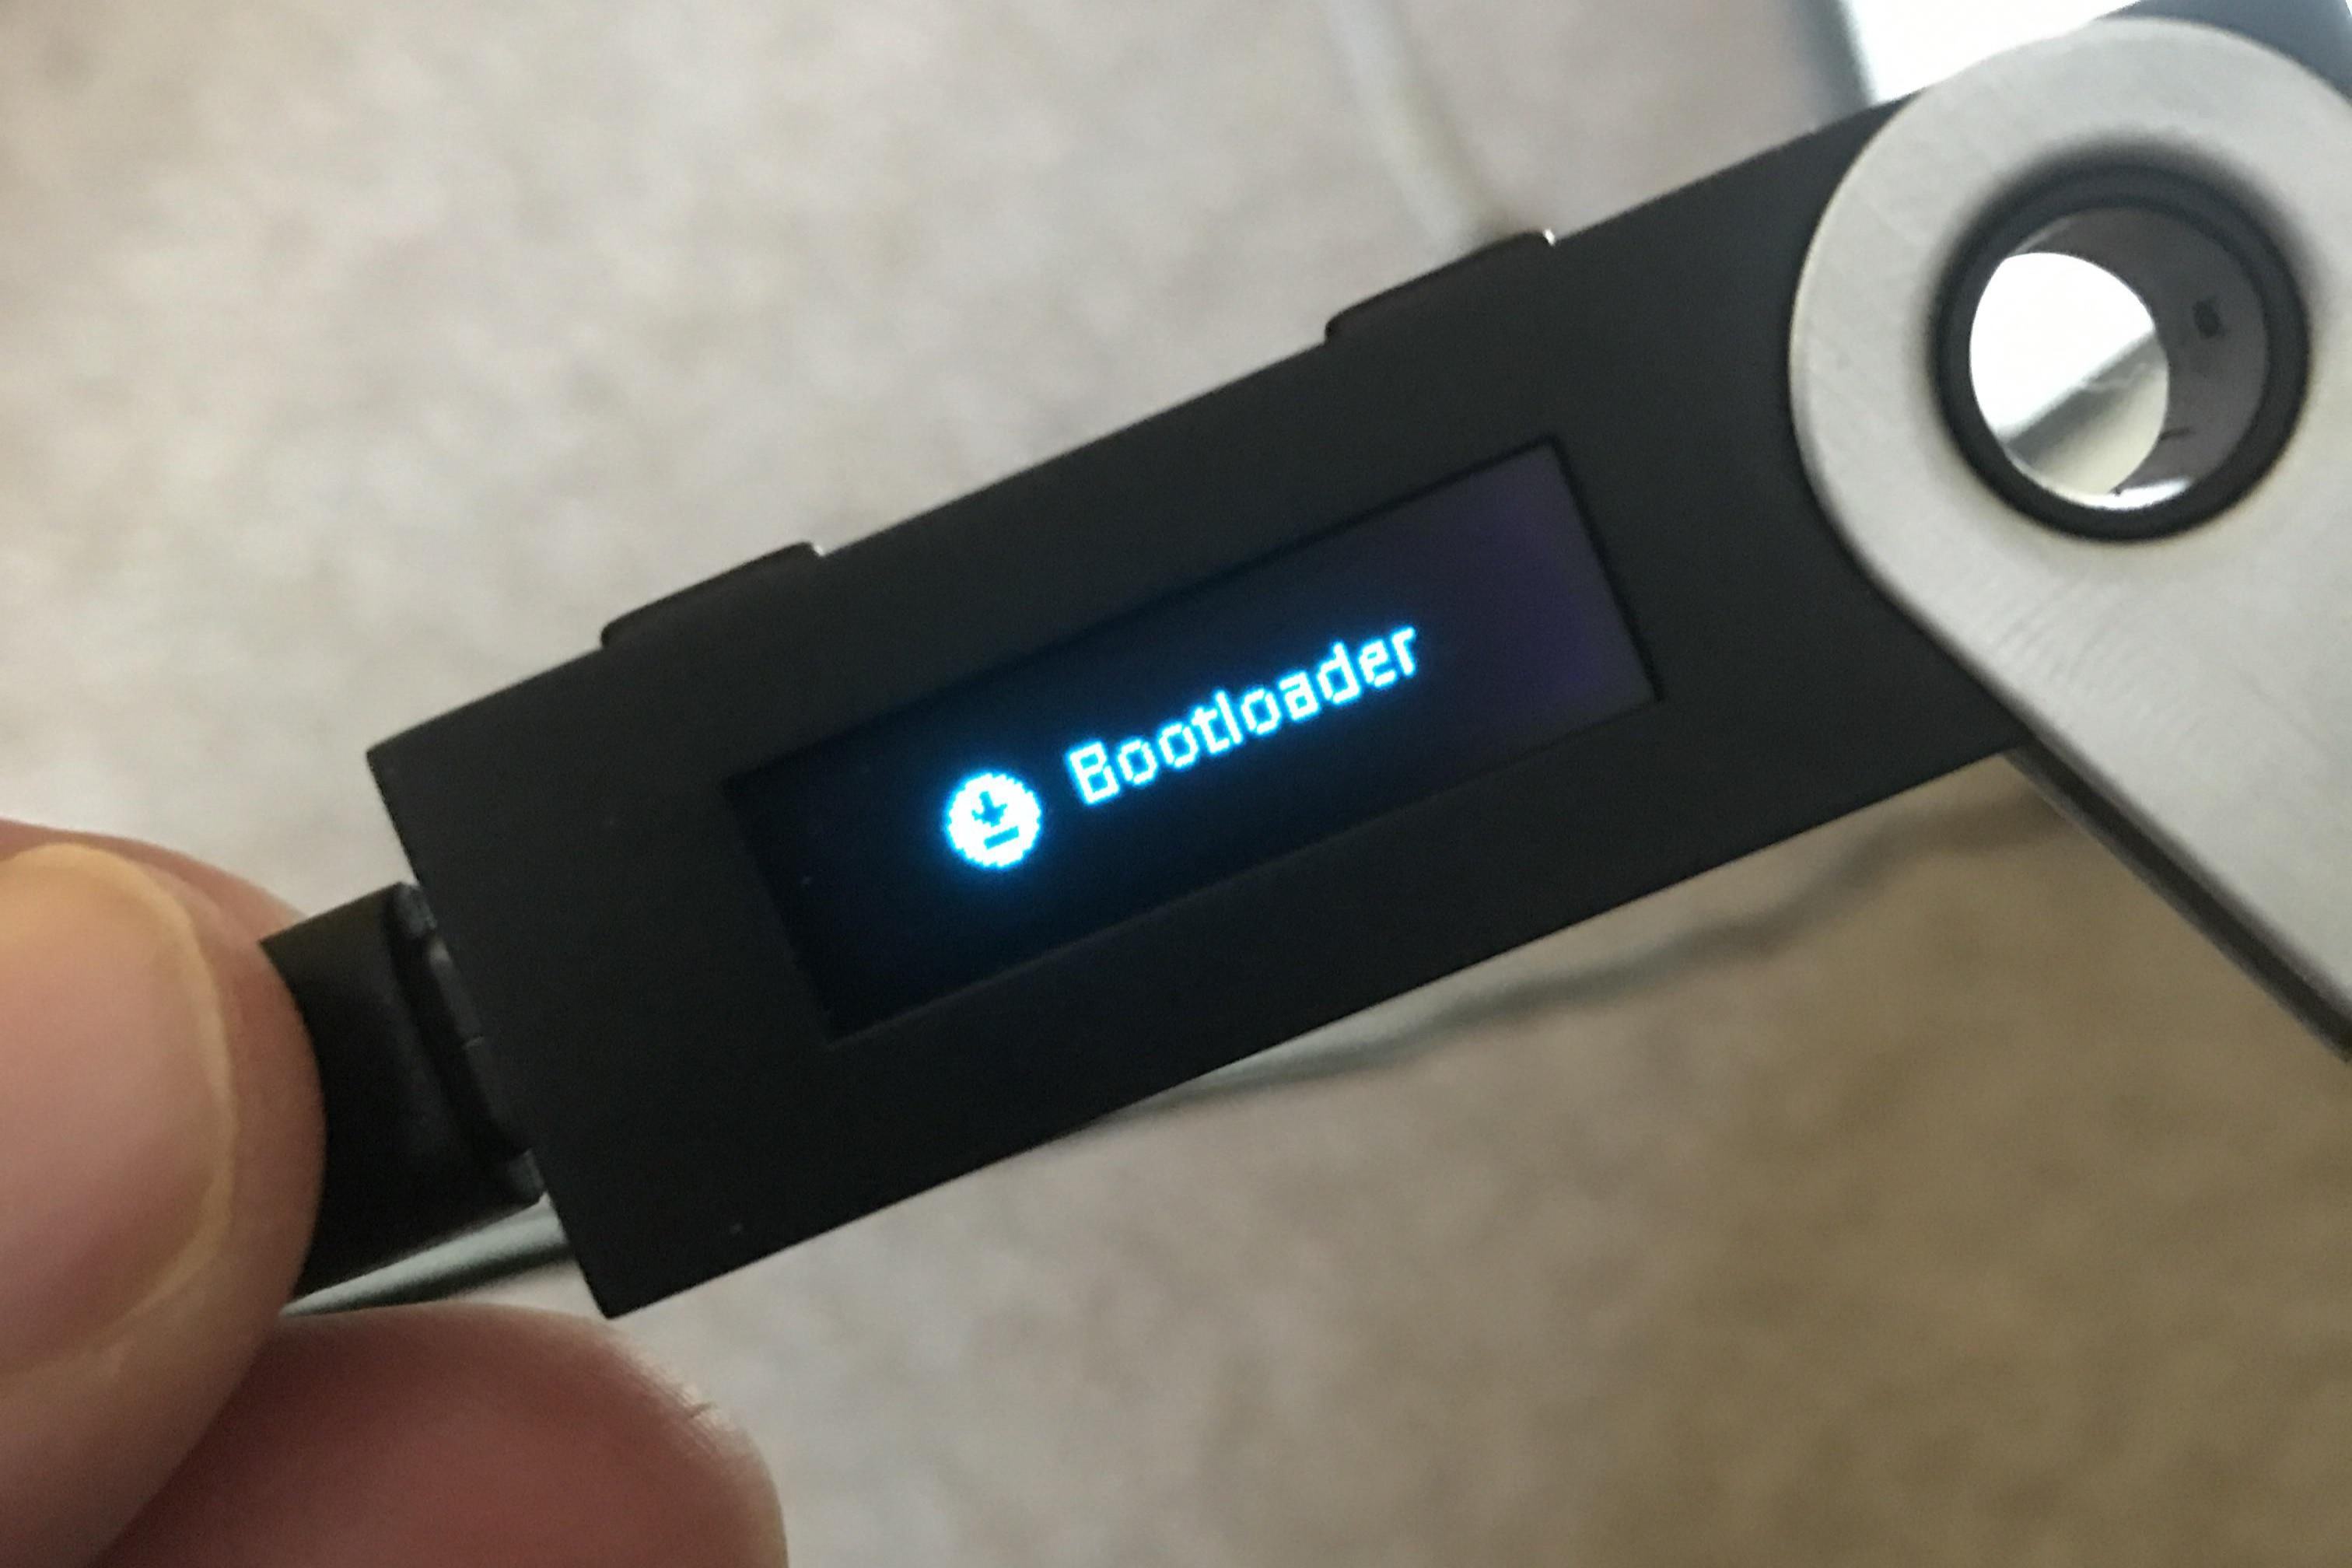 ledger-nano-s-stuck-in-bootloader-when-trying-to-update-firmware